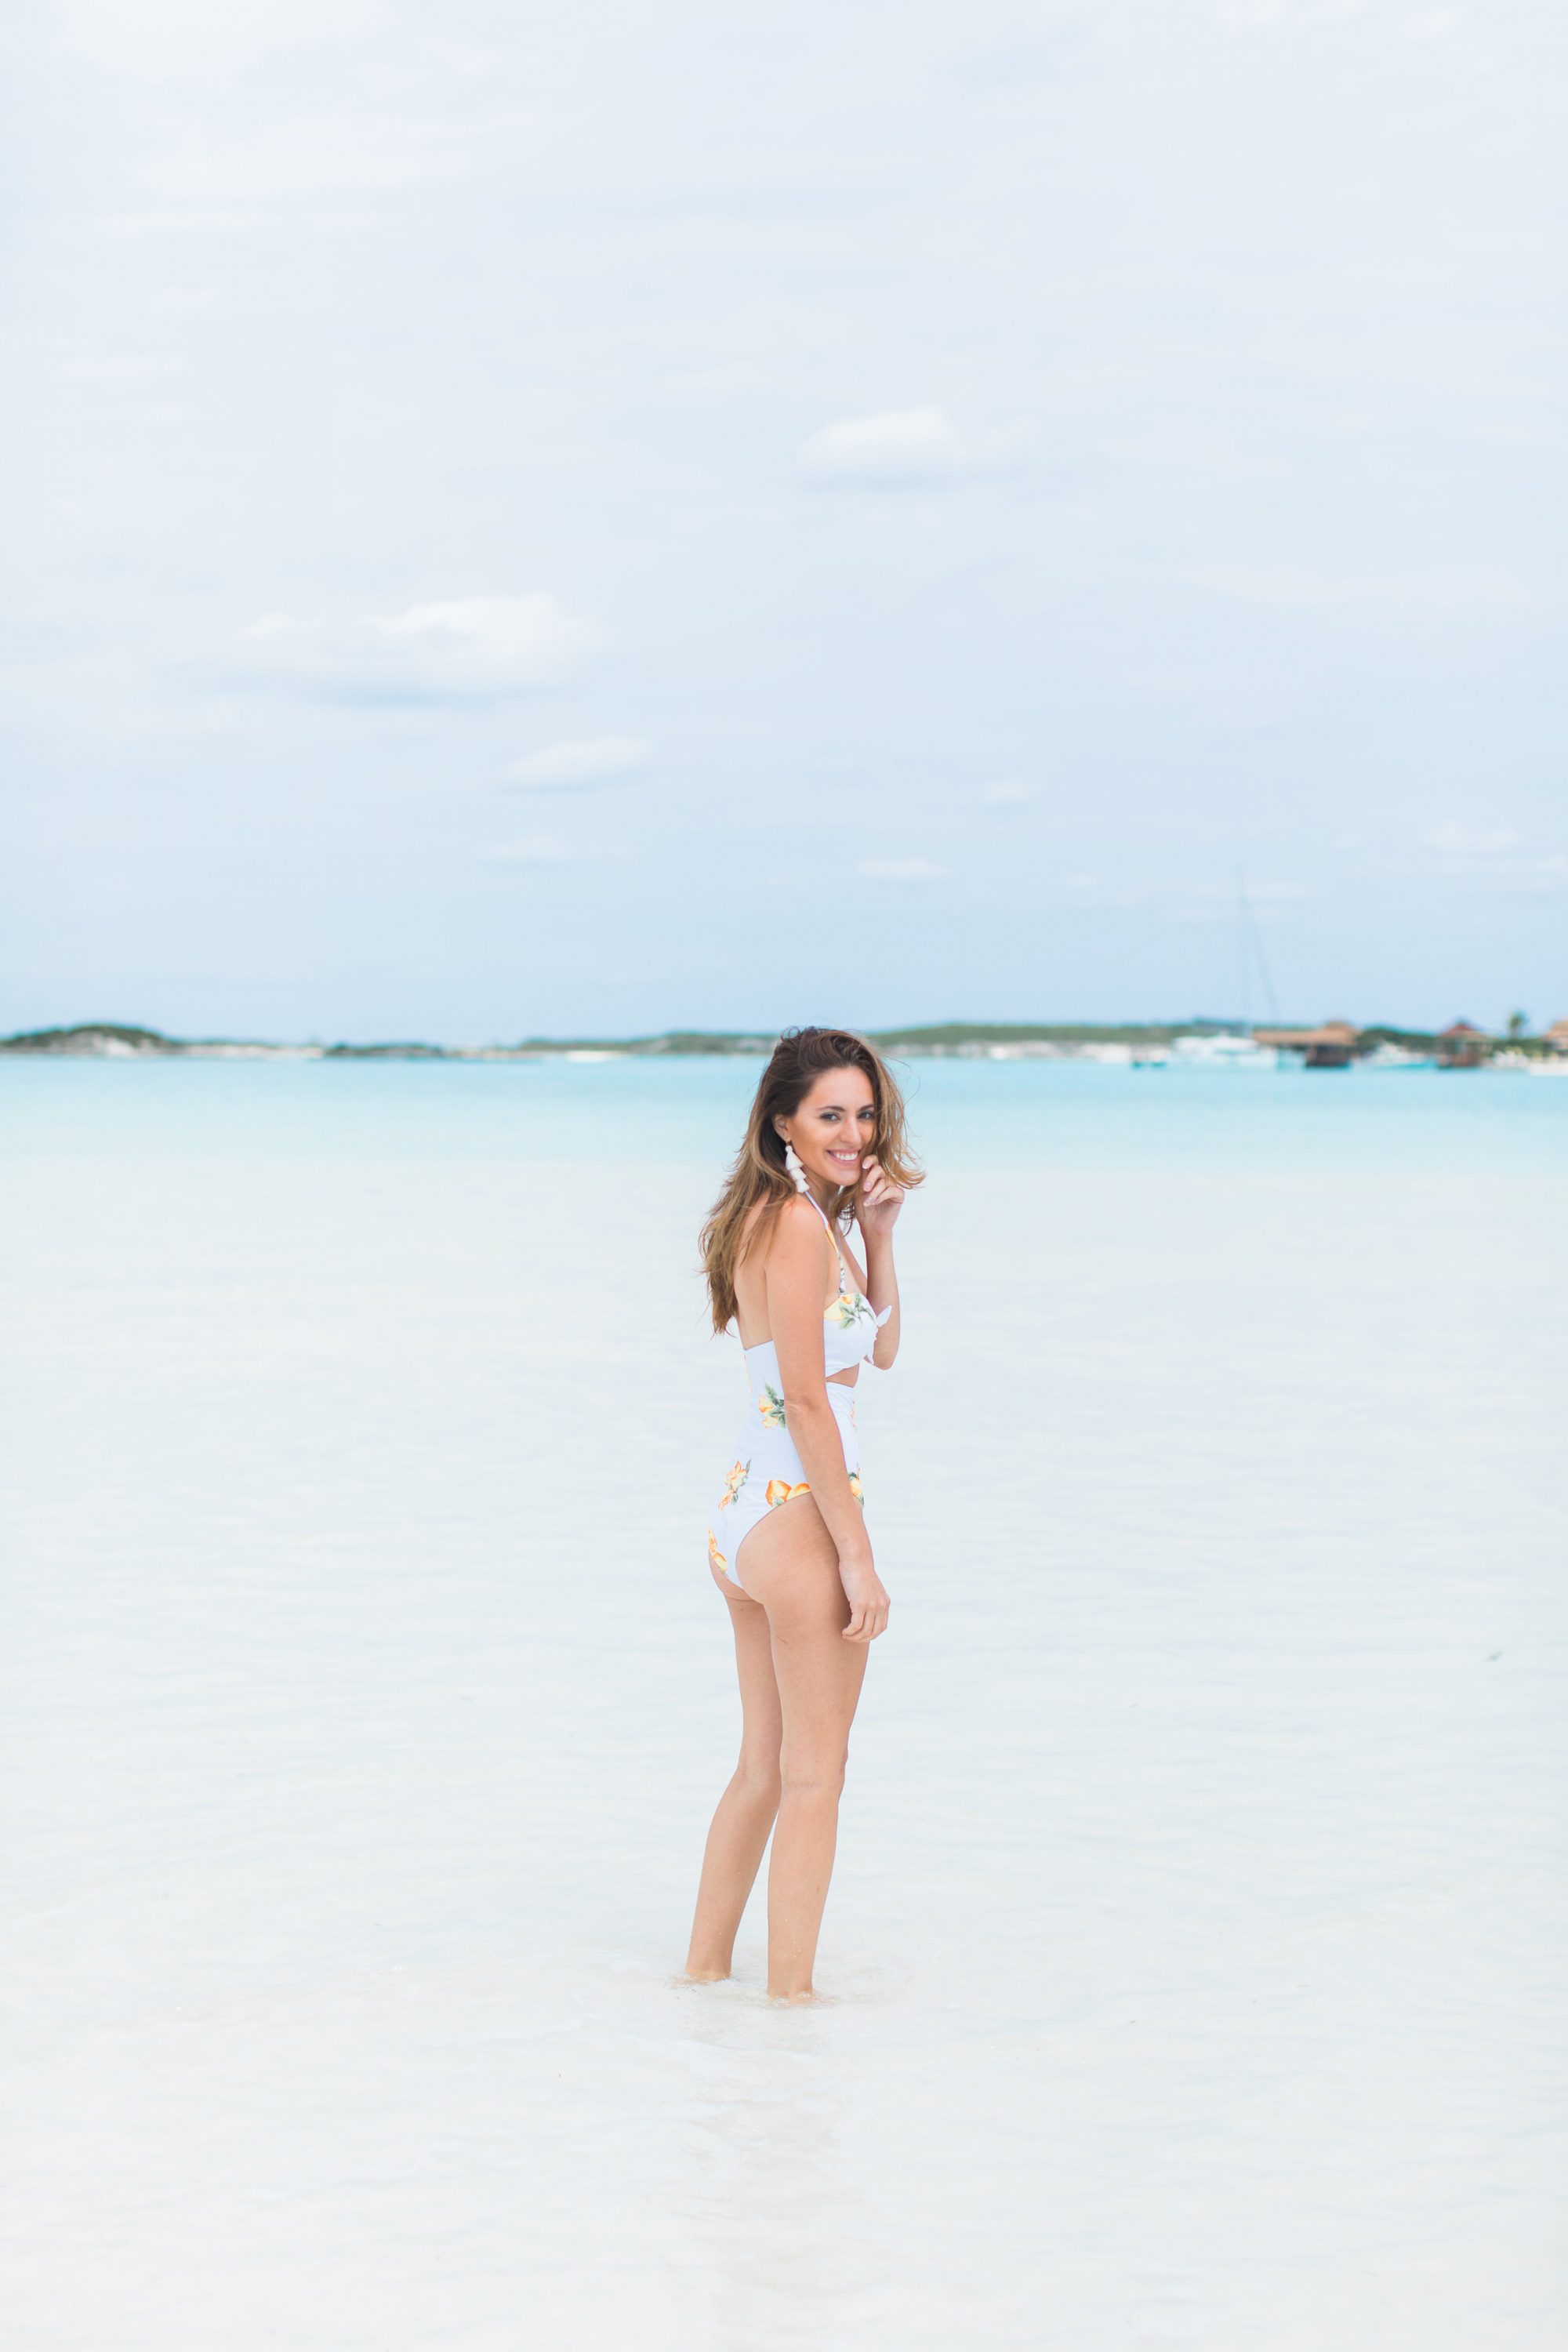 exuma, the bahamas, its better in the bahamas, swimming pigs exuma, forever21 ADD TO FAVORITES Cutout Lemon One-Piece Swimsuit, SUGARFIX by BaubleBar Tiered Tassel Drop Earrings in white, what to do in exuma, bahamas travel guide, forever21 Oversized Round Sunglasses